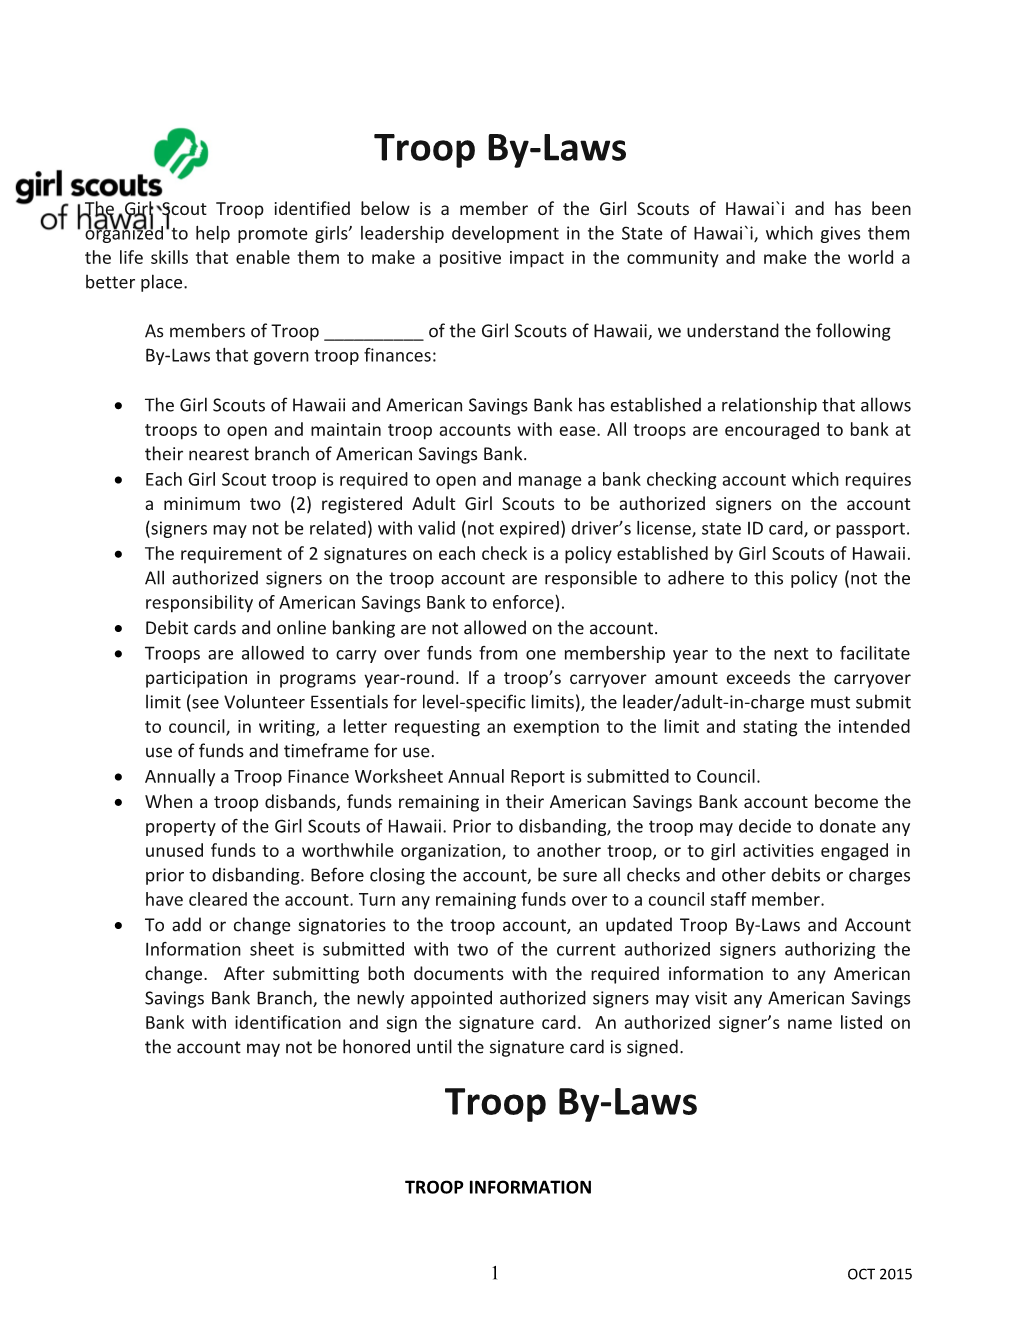 The Girl Scout Troop Identified Below Is a Member of the Girl Scouts of Hawai I and Has